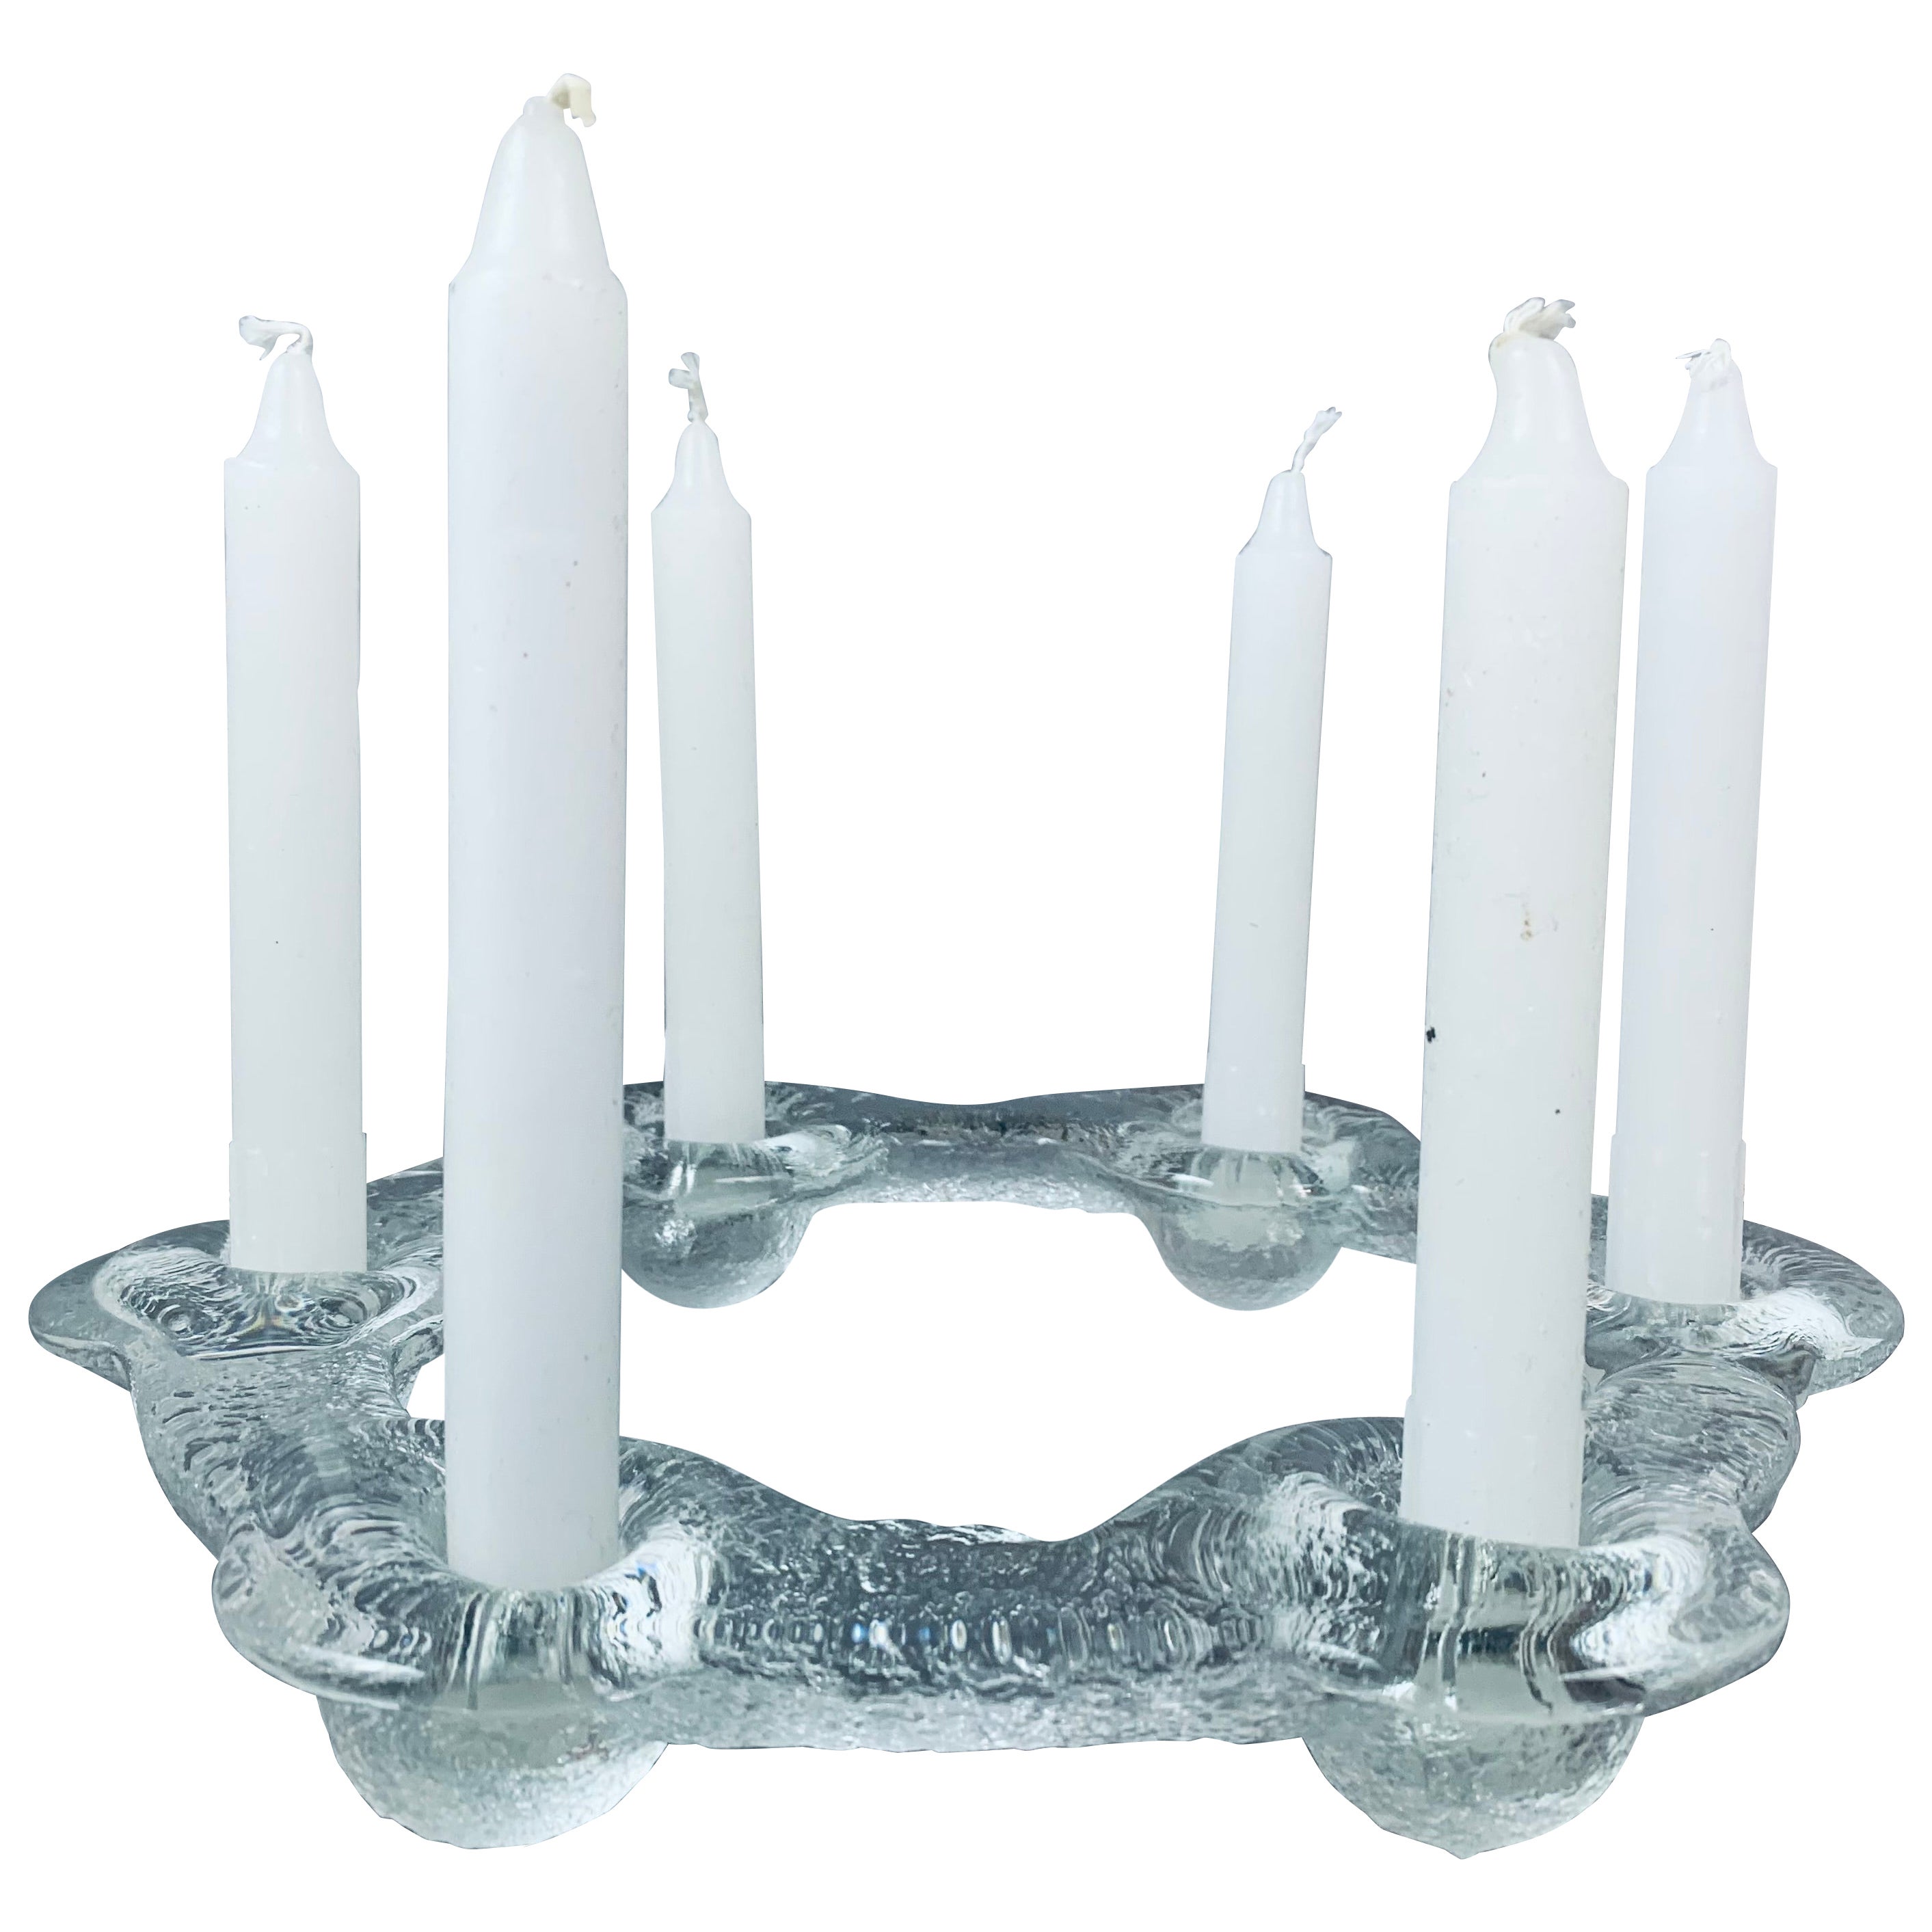 1970s Swedish Pukeberg Glass Candle Holder or Candelabra by Uno Westerberg  For Sale at 1stDibs | swedish glass candle holders, pukeberg glass candle  holders, pukeberg candle holder